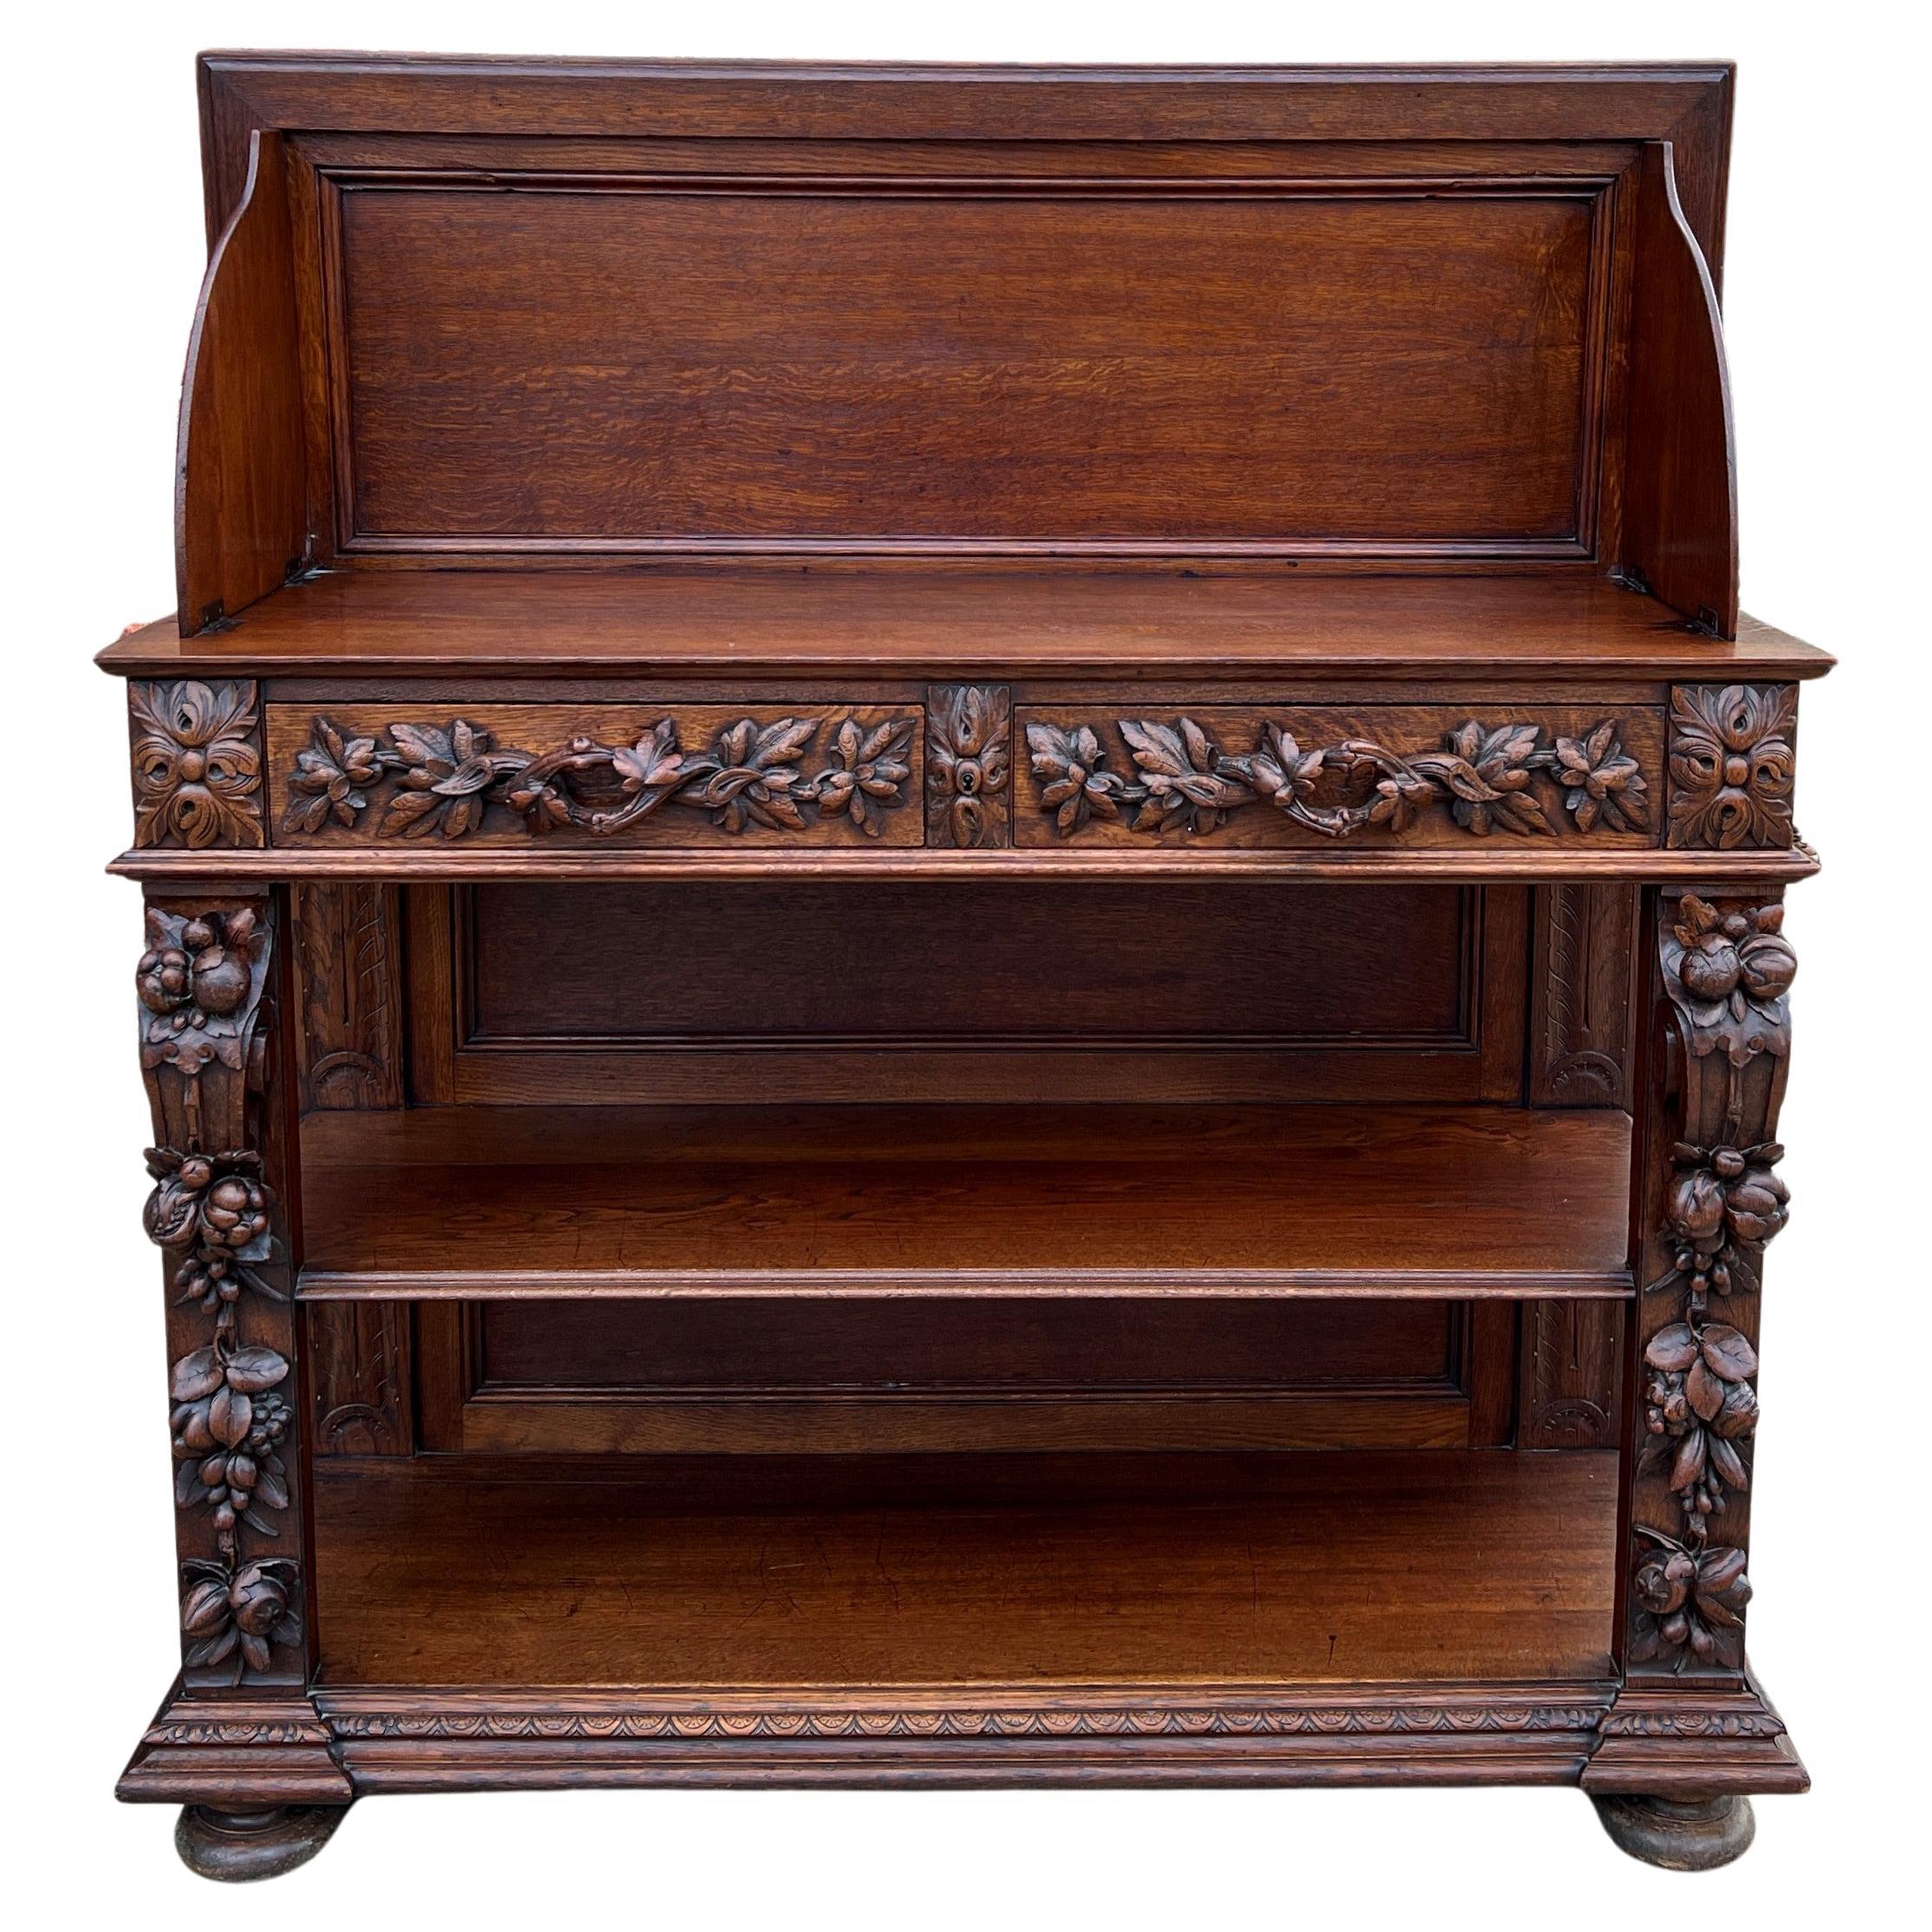 Antique French Server Sideboard Console Sofa Table 3-Tier Drawers Carved Oak 19c For Sale